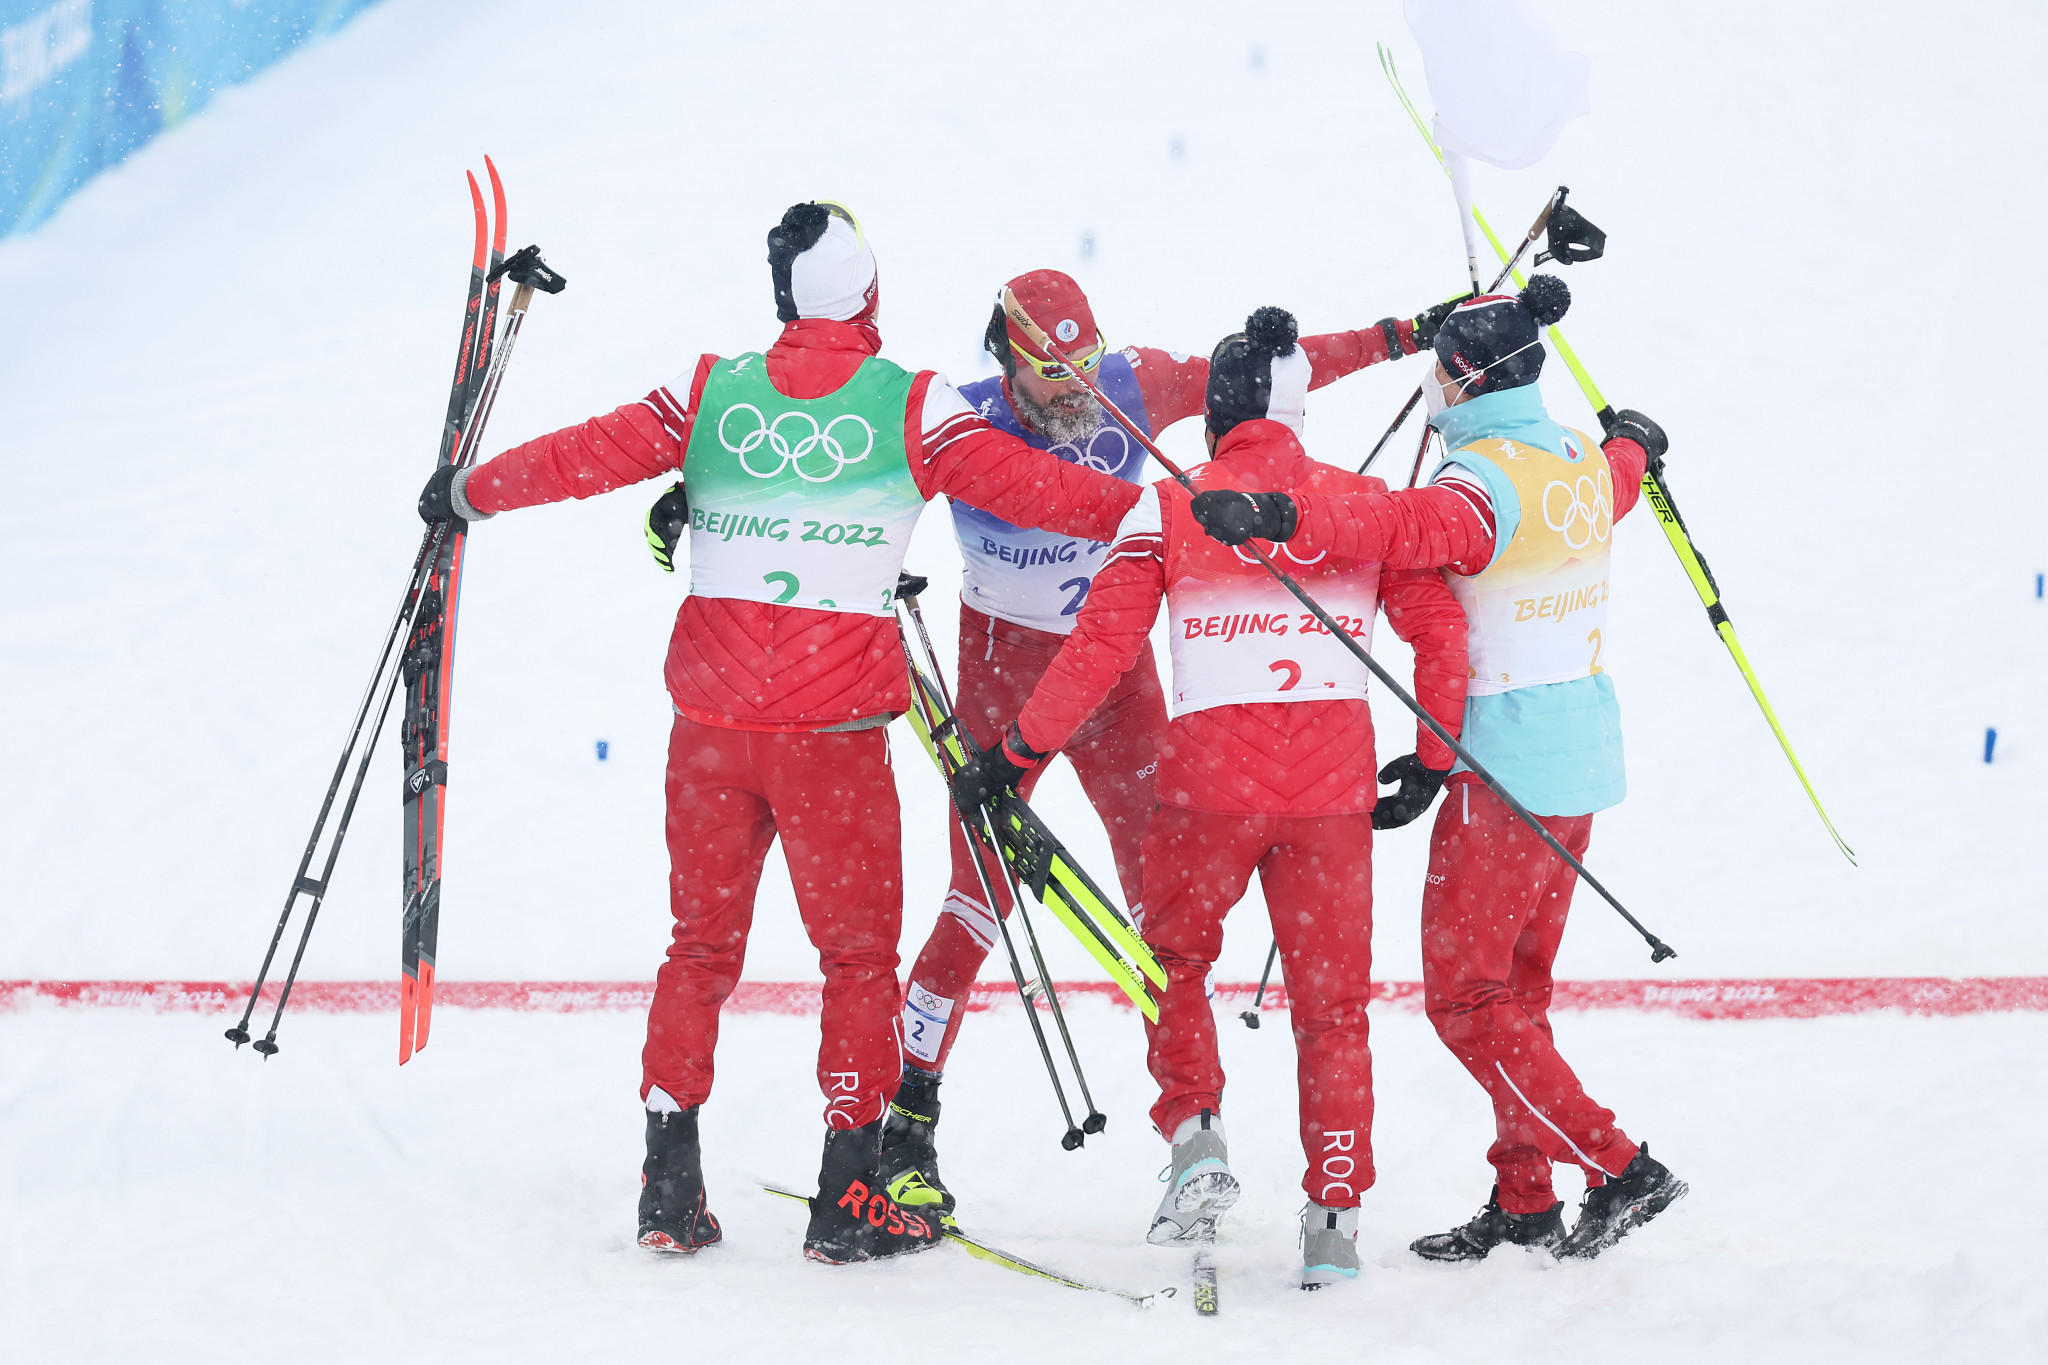 The Russian Olympic Committee (ROC) team celebrate after winning the men’s 4x10km cross country relay ©Getty Images